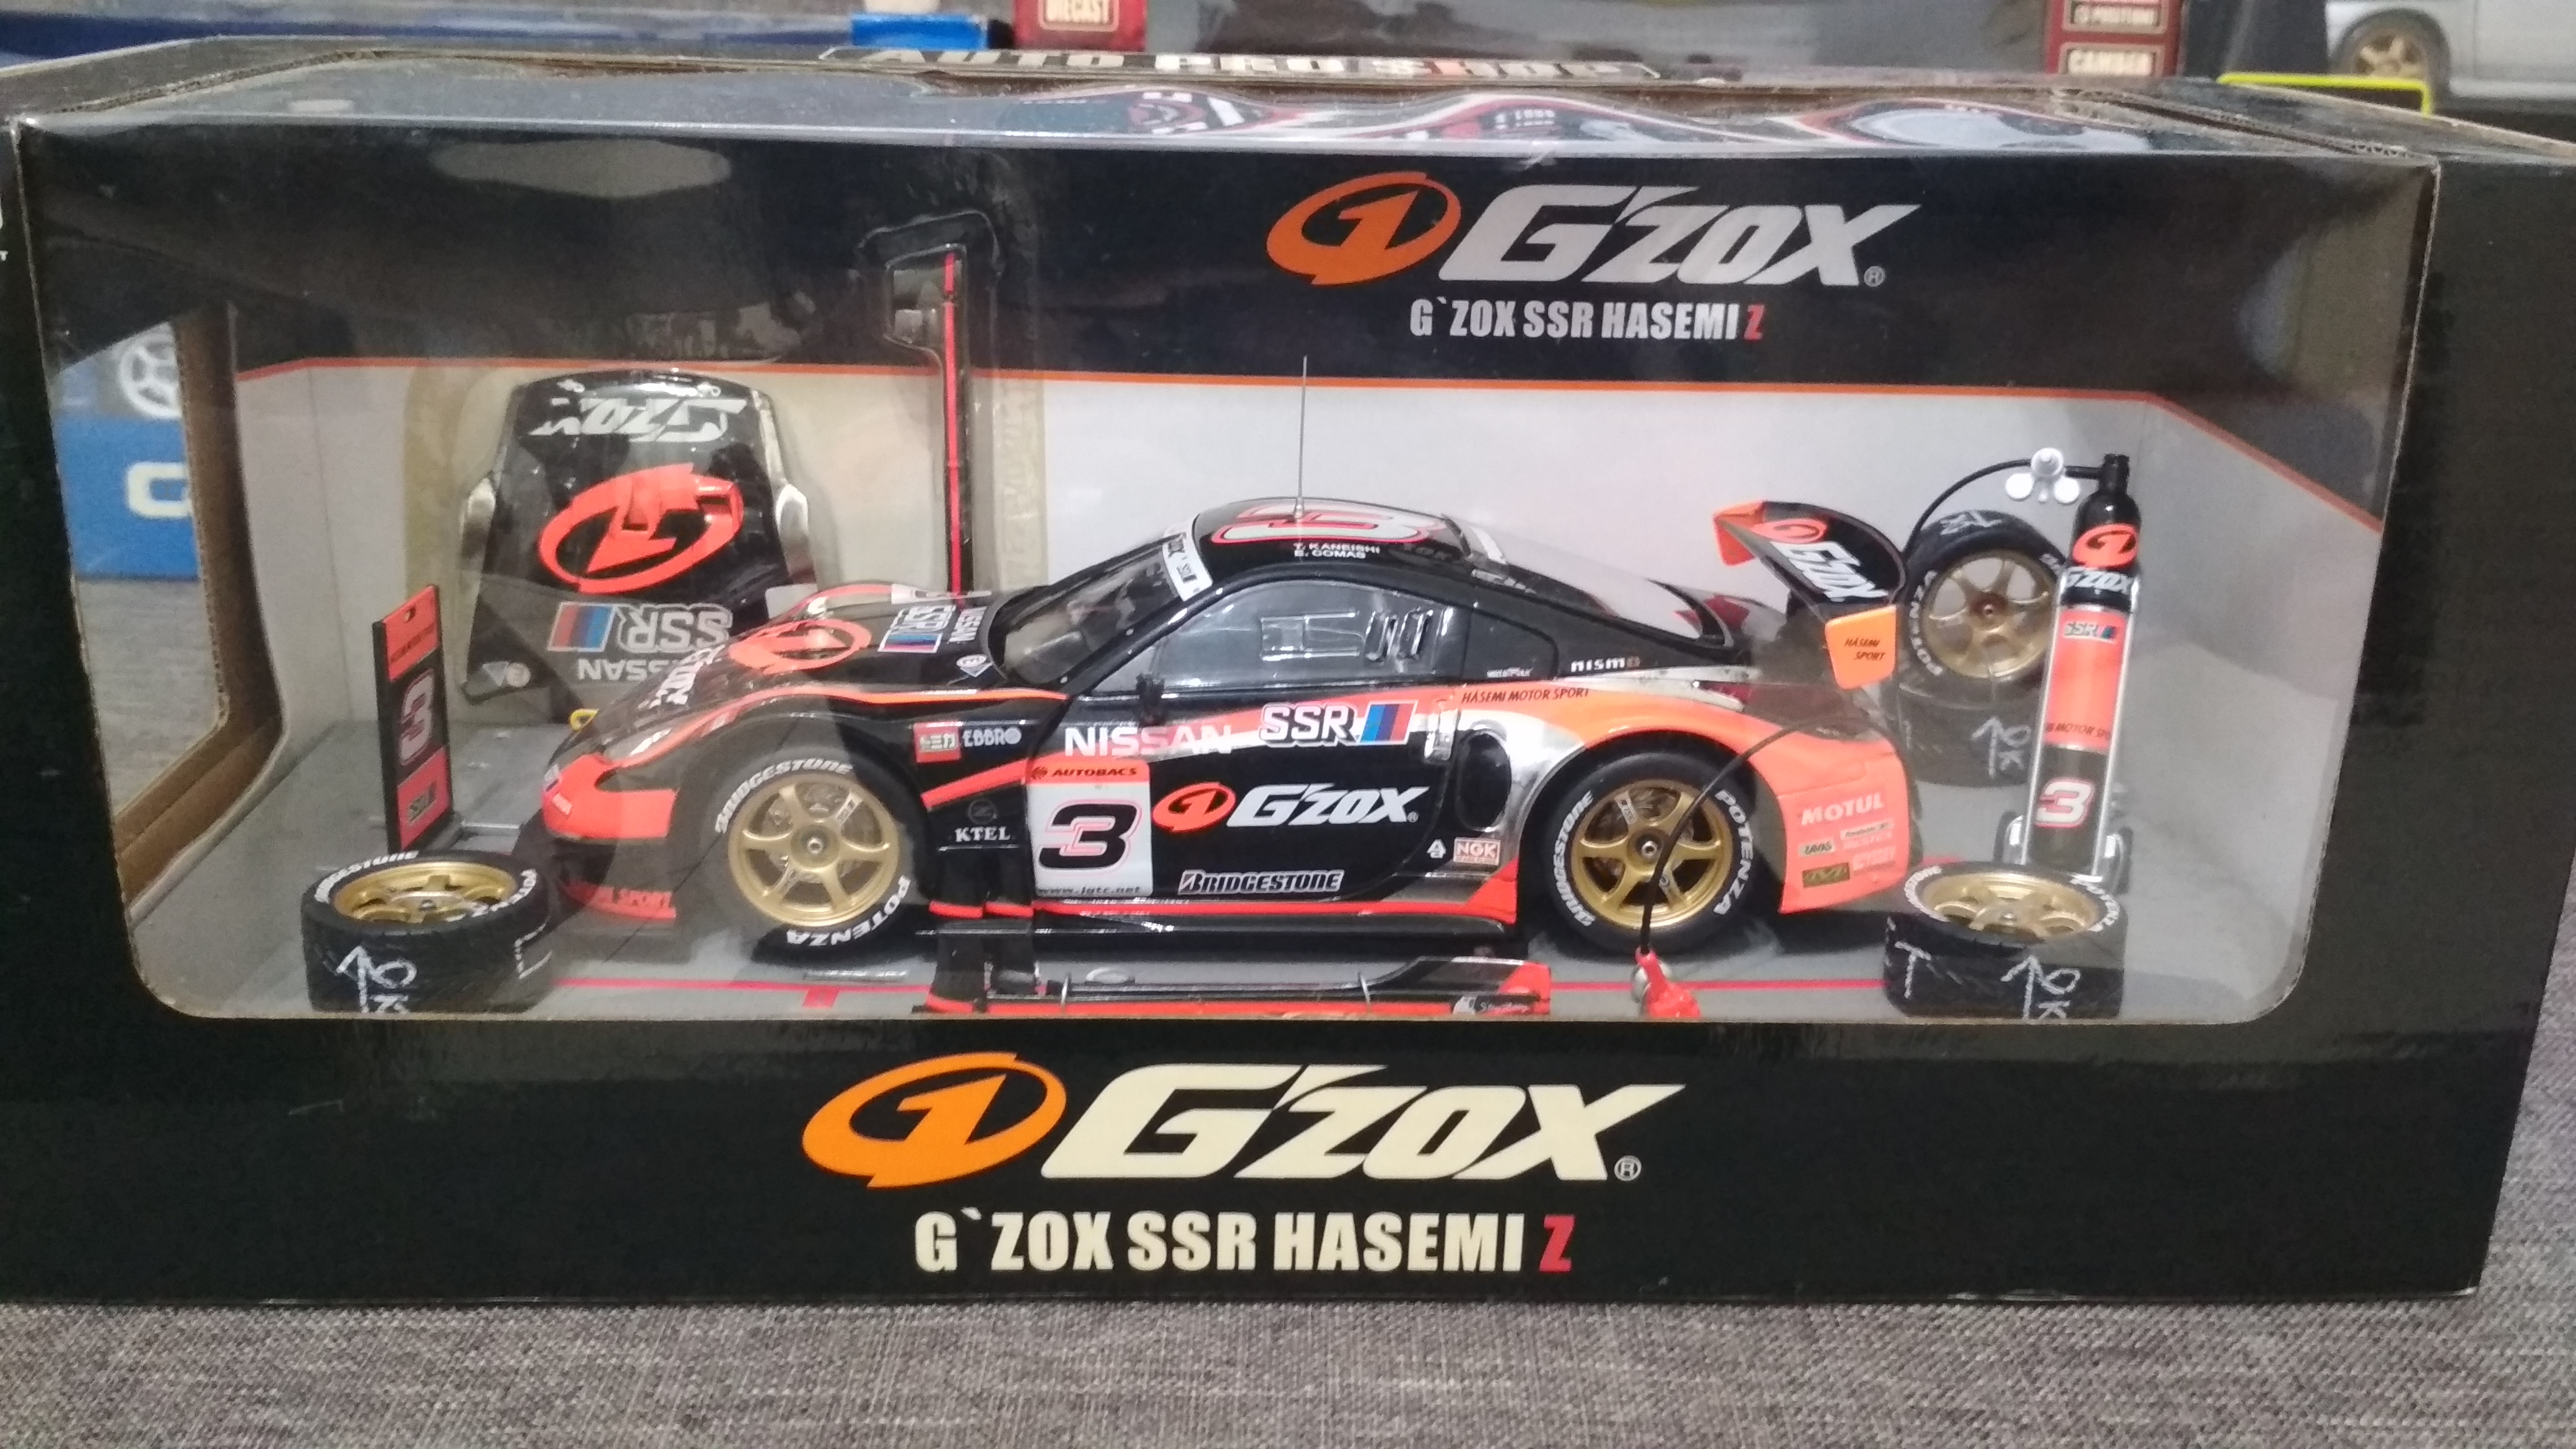 hotworks gzox 350z diecast scale 1/24, Hobbies & Toys, Toys